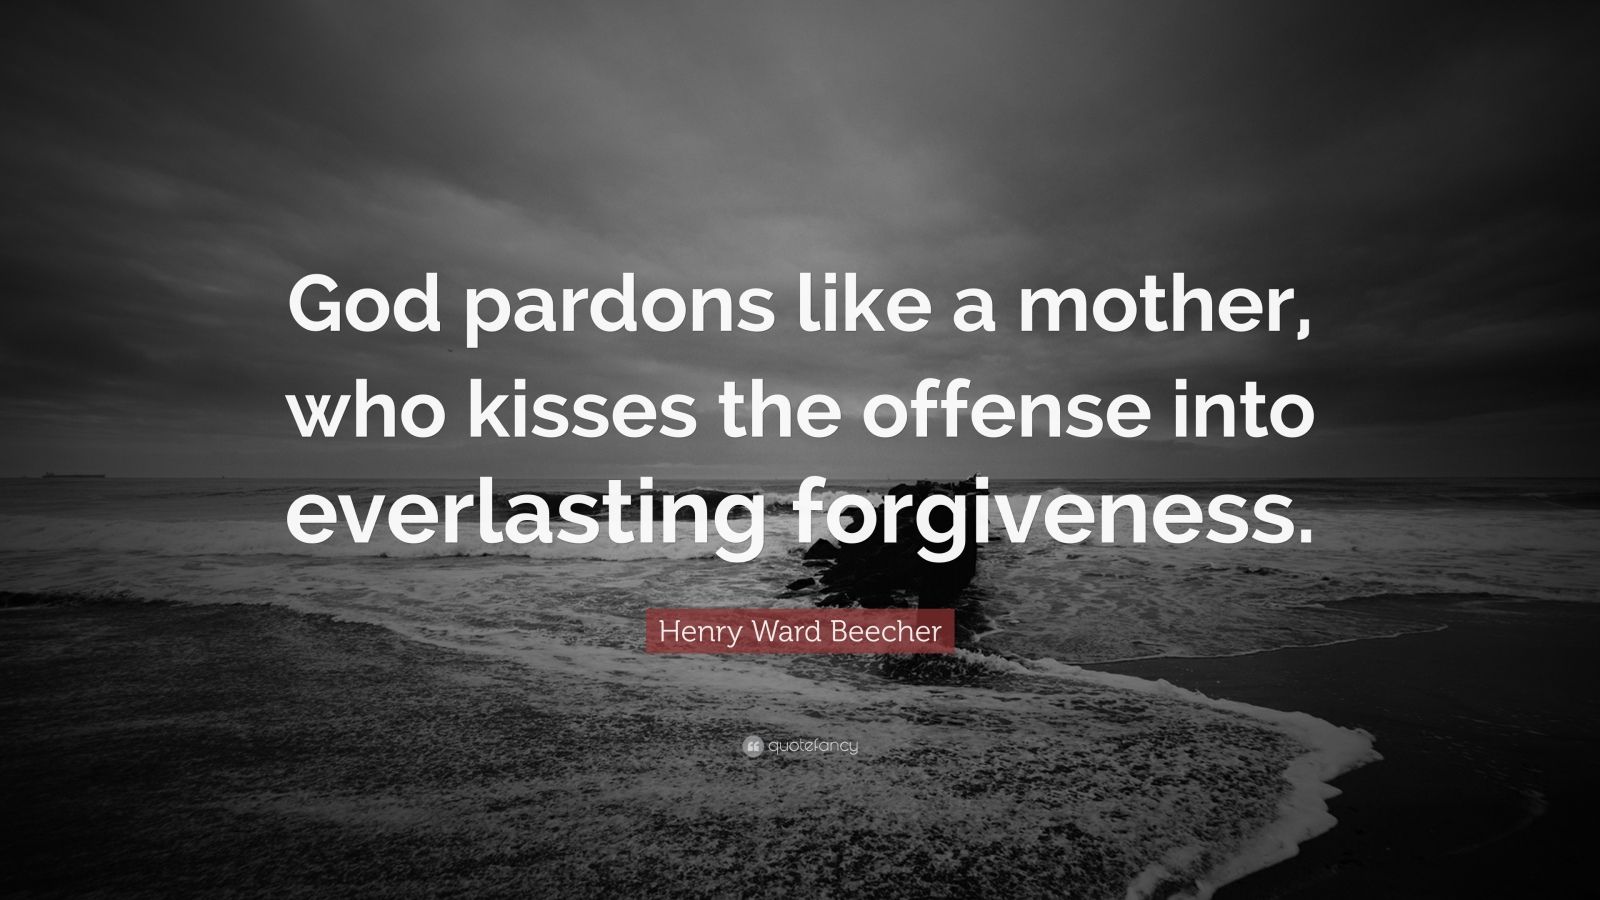 Henry Ward Beecher Quote: “God pardons like a mother, who kisses the ...